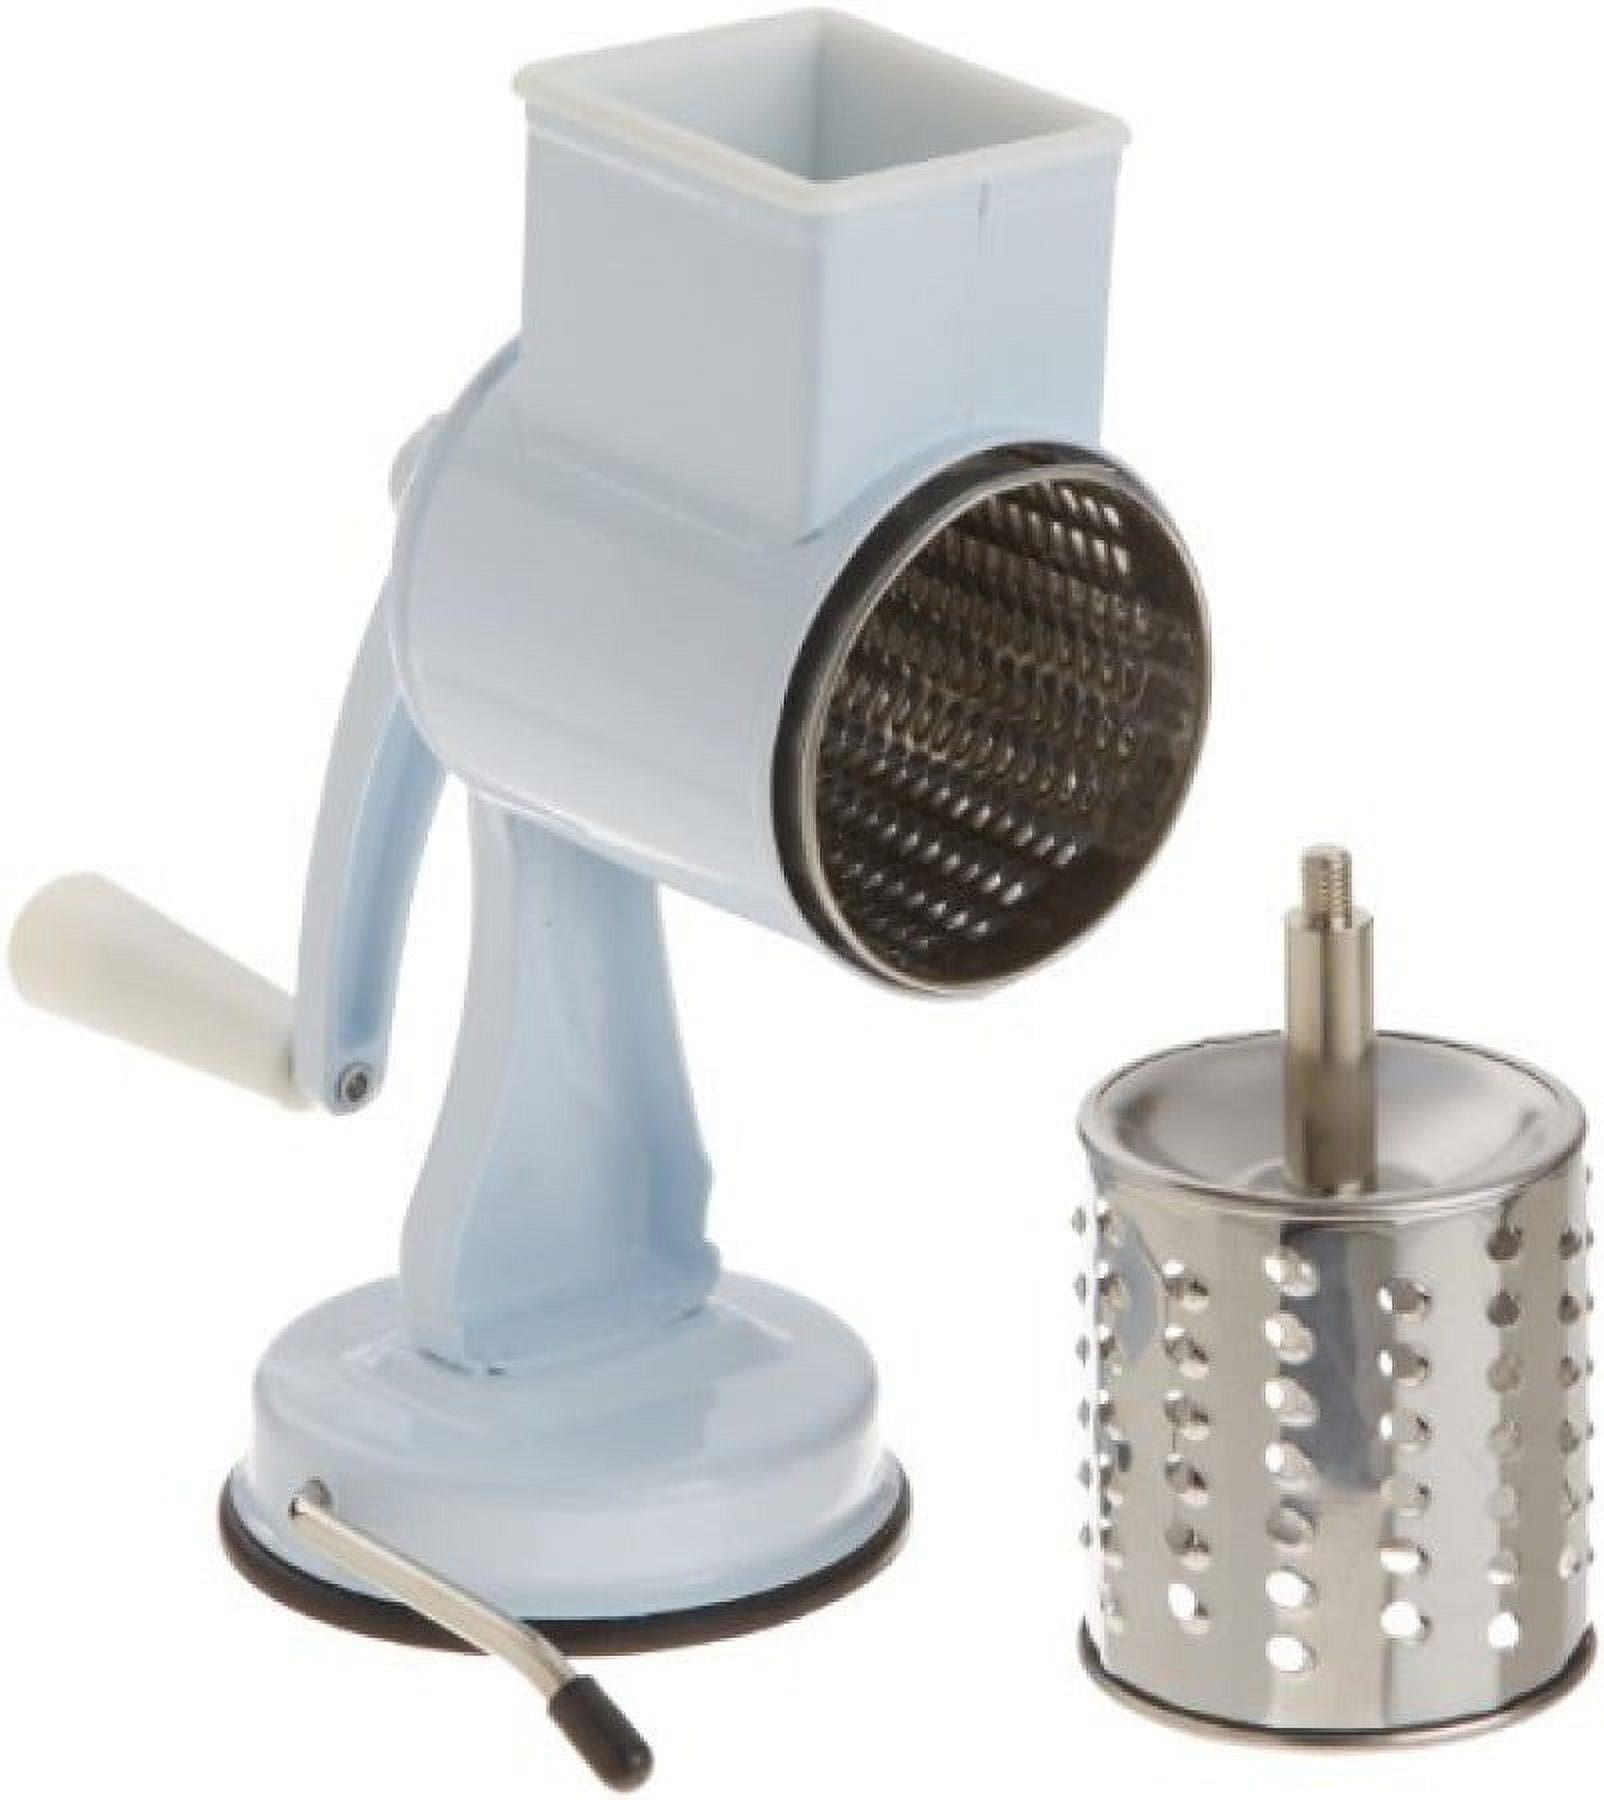 Vivaant Professional-Grade Rotary Grater - 2 Stainless Steel Drums